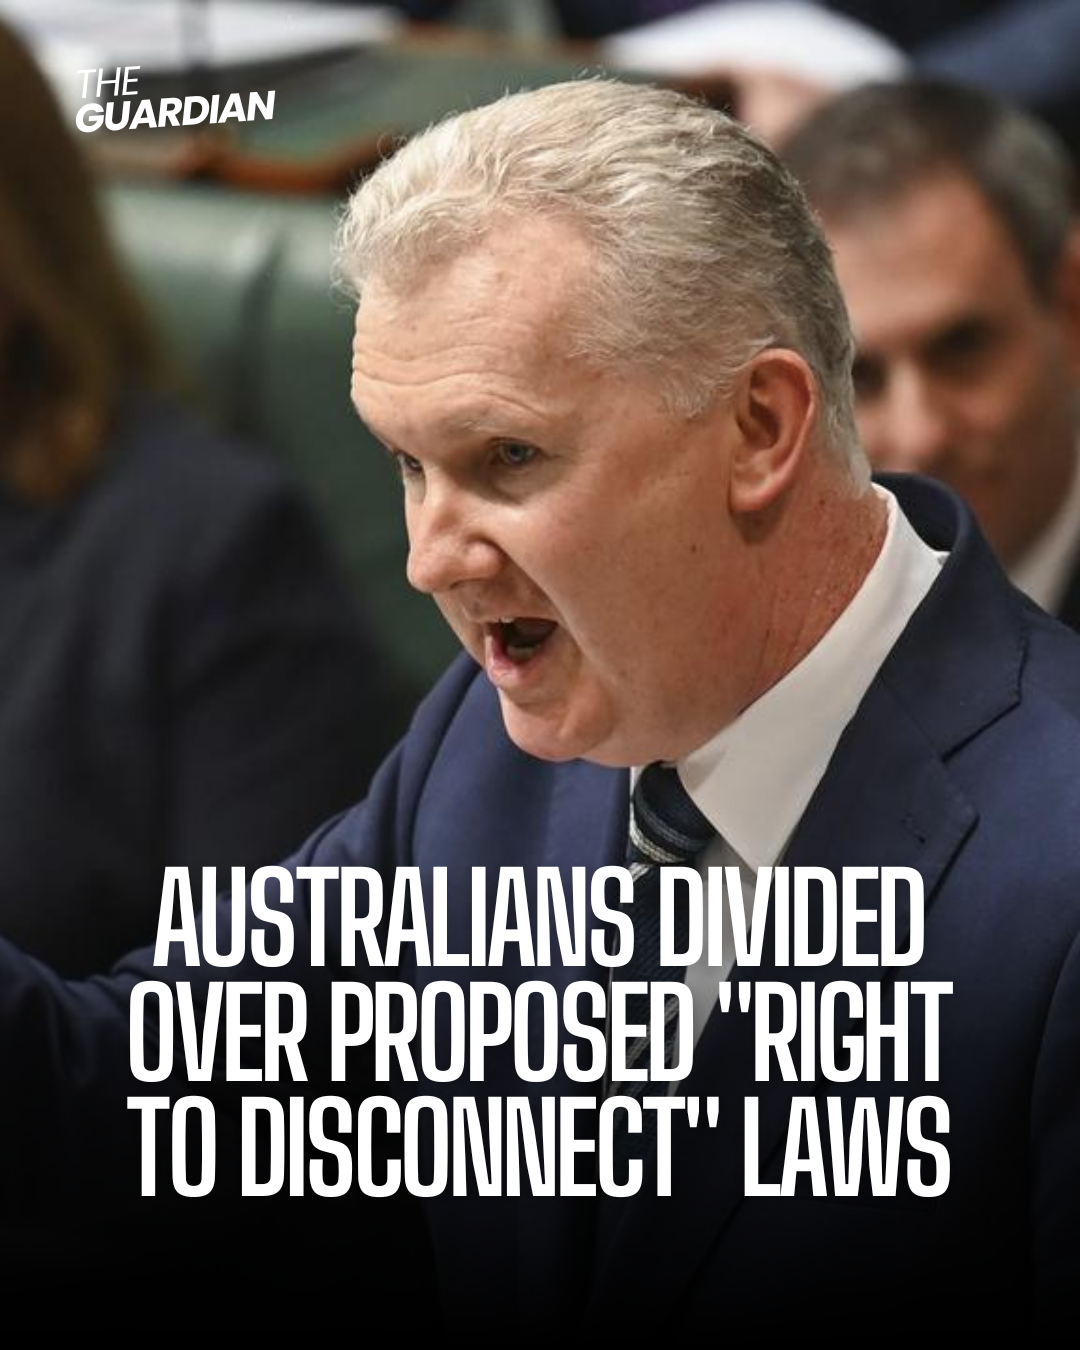 Australians excitedly welcomed the proposed "right to disconnect" rules, which they saw as a much-needed step.